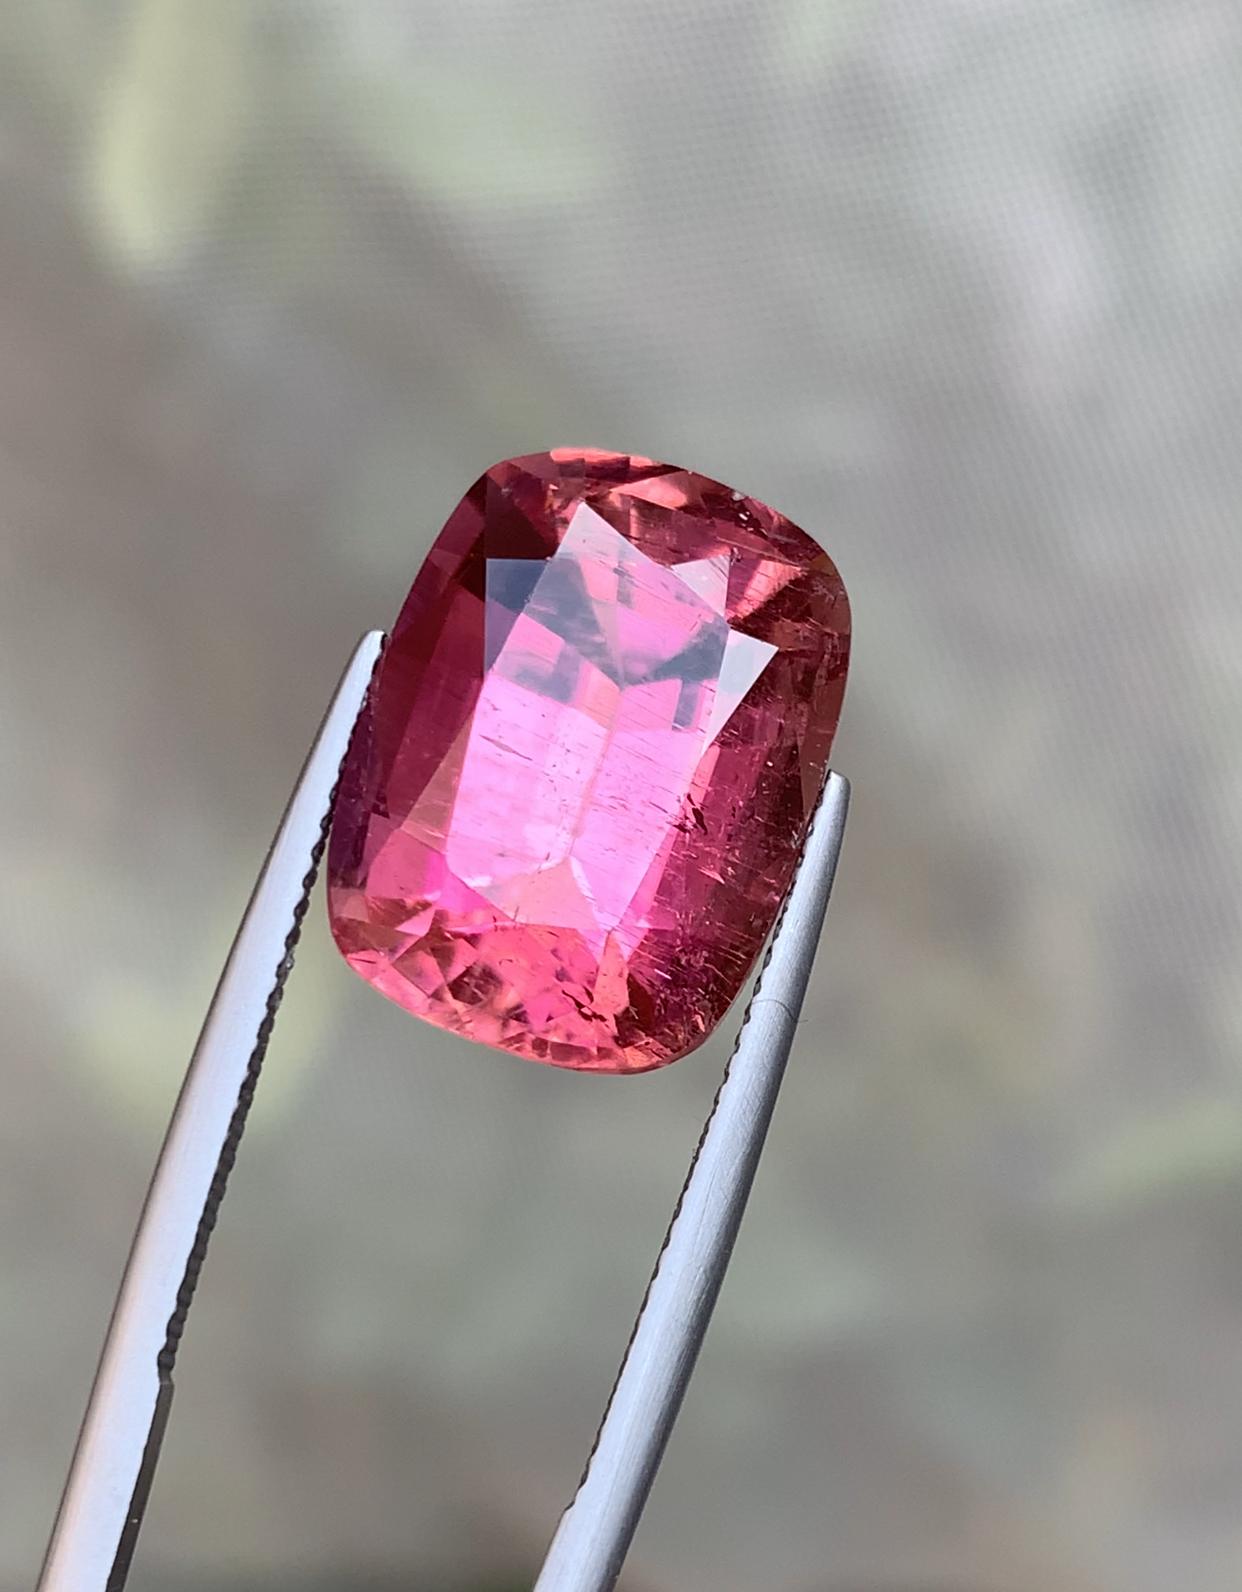 Rare Pink Natural Tourmaline Gemstone, 14.5 Ct Cushion Cut for Ring or Pendant For Sale 4